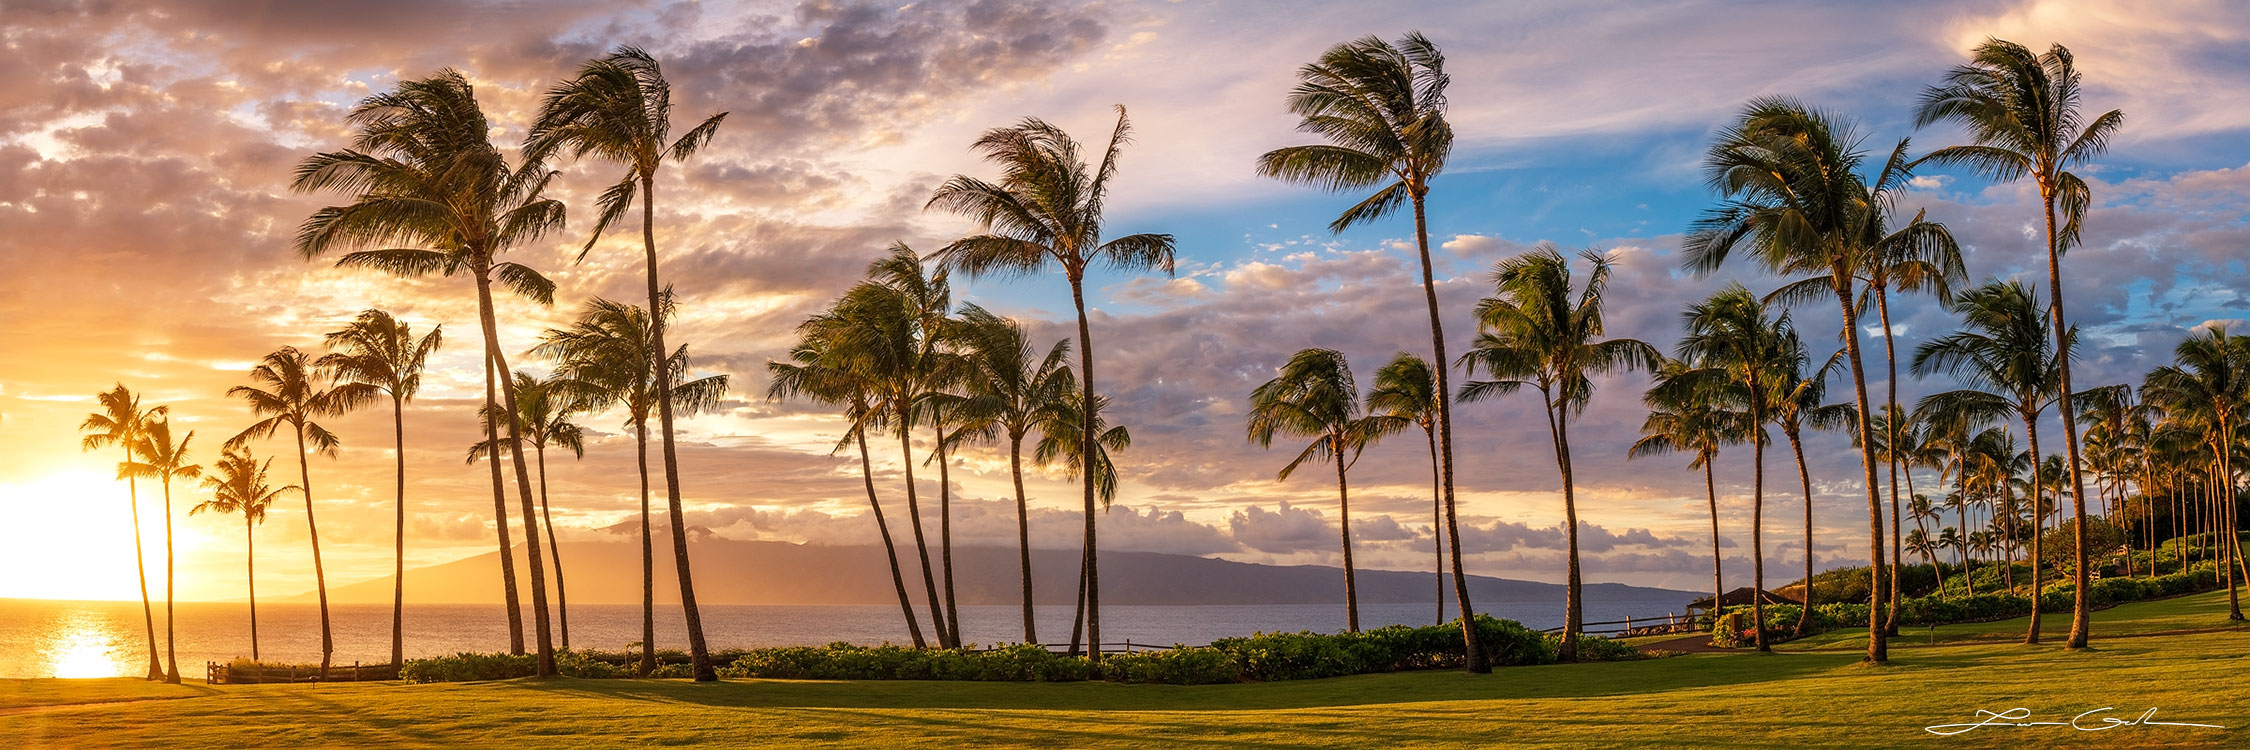 'Hawaiian Paradise' is a fine art photo print showcasing Maui, Hawaii. The image displays tall palm trees on a lush meadow beside a sparkling ocean. The sunset casts a golden hue over the scene, contrasting against a blue sky dotted with clouds. A distant island silhouette adds depth. This captivating piece evokes the tranquil and vibrant spirit of Hawaii. - Gintchin Fine Art